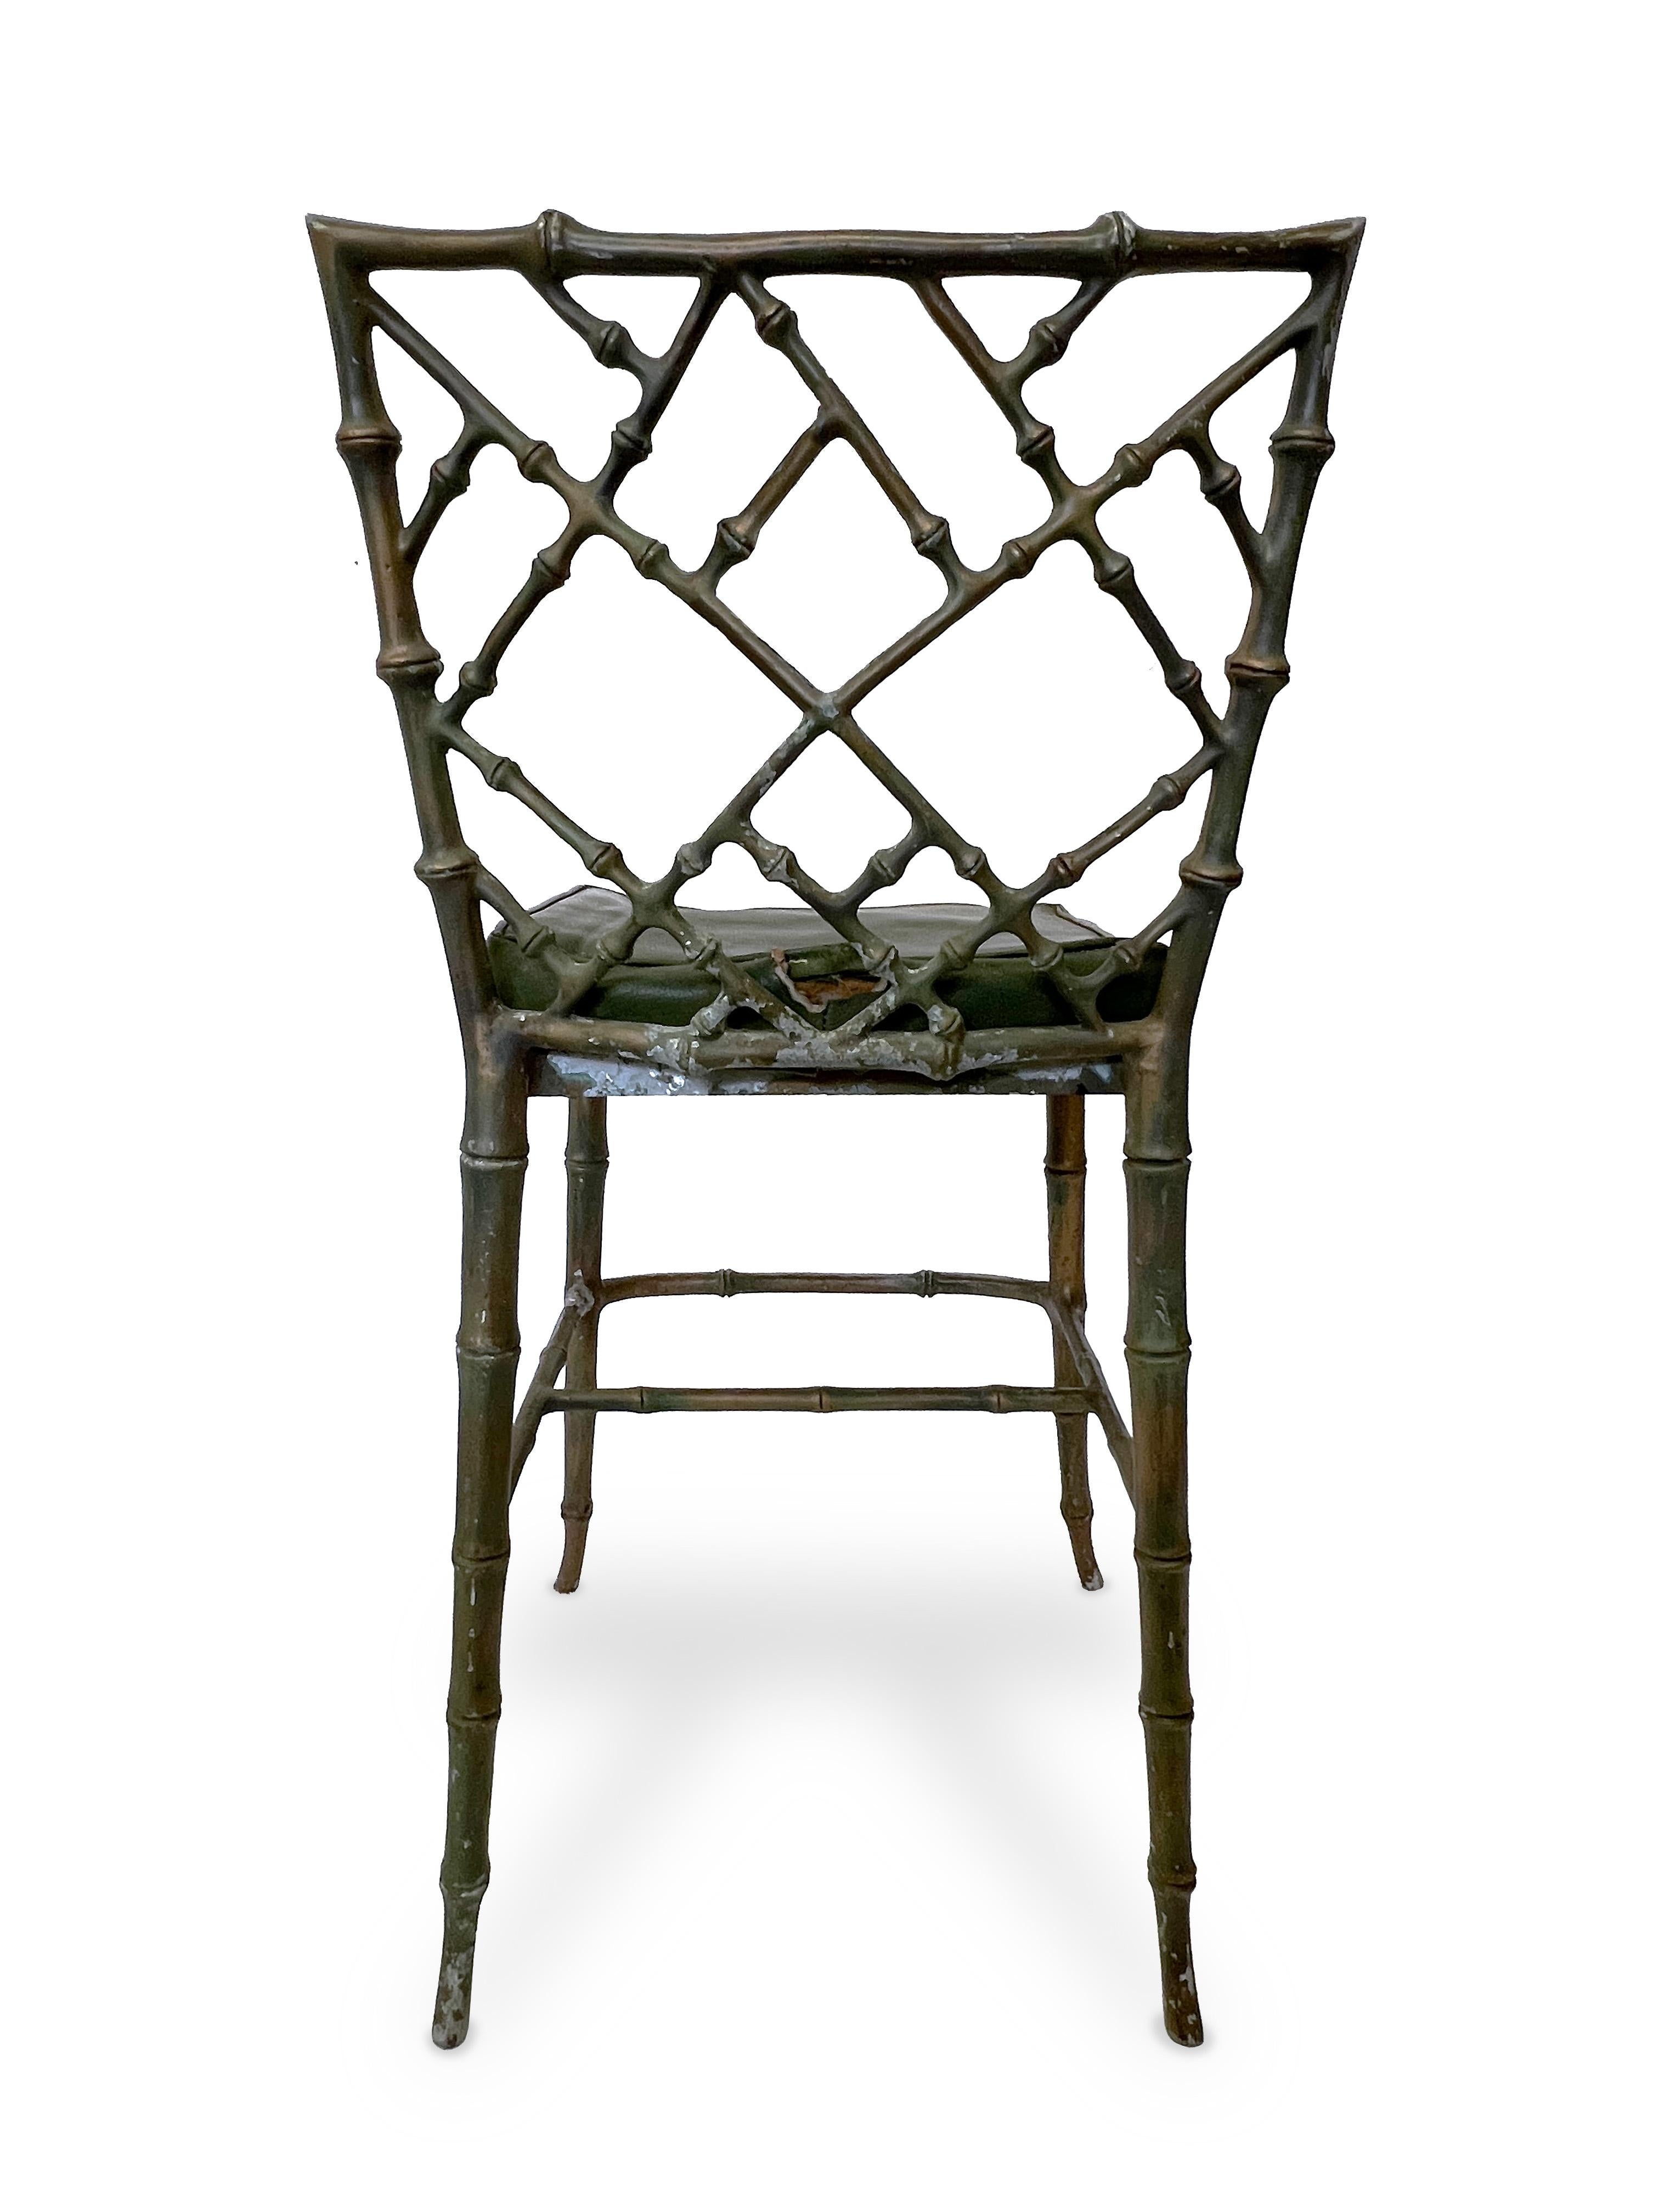 American Pair of Faux Bamboo Metal Frame Chair Stools